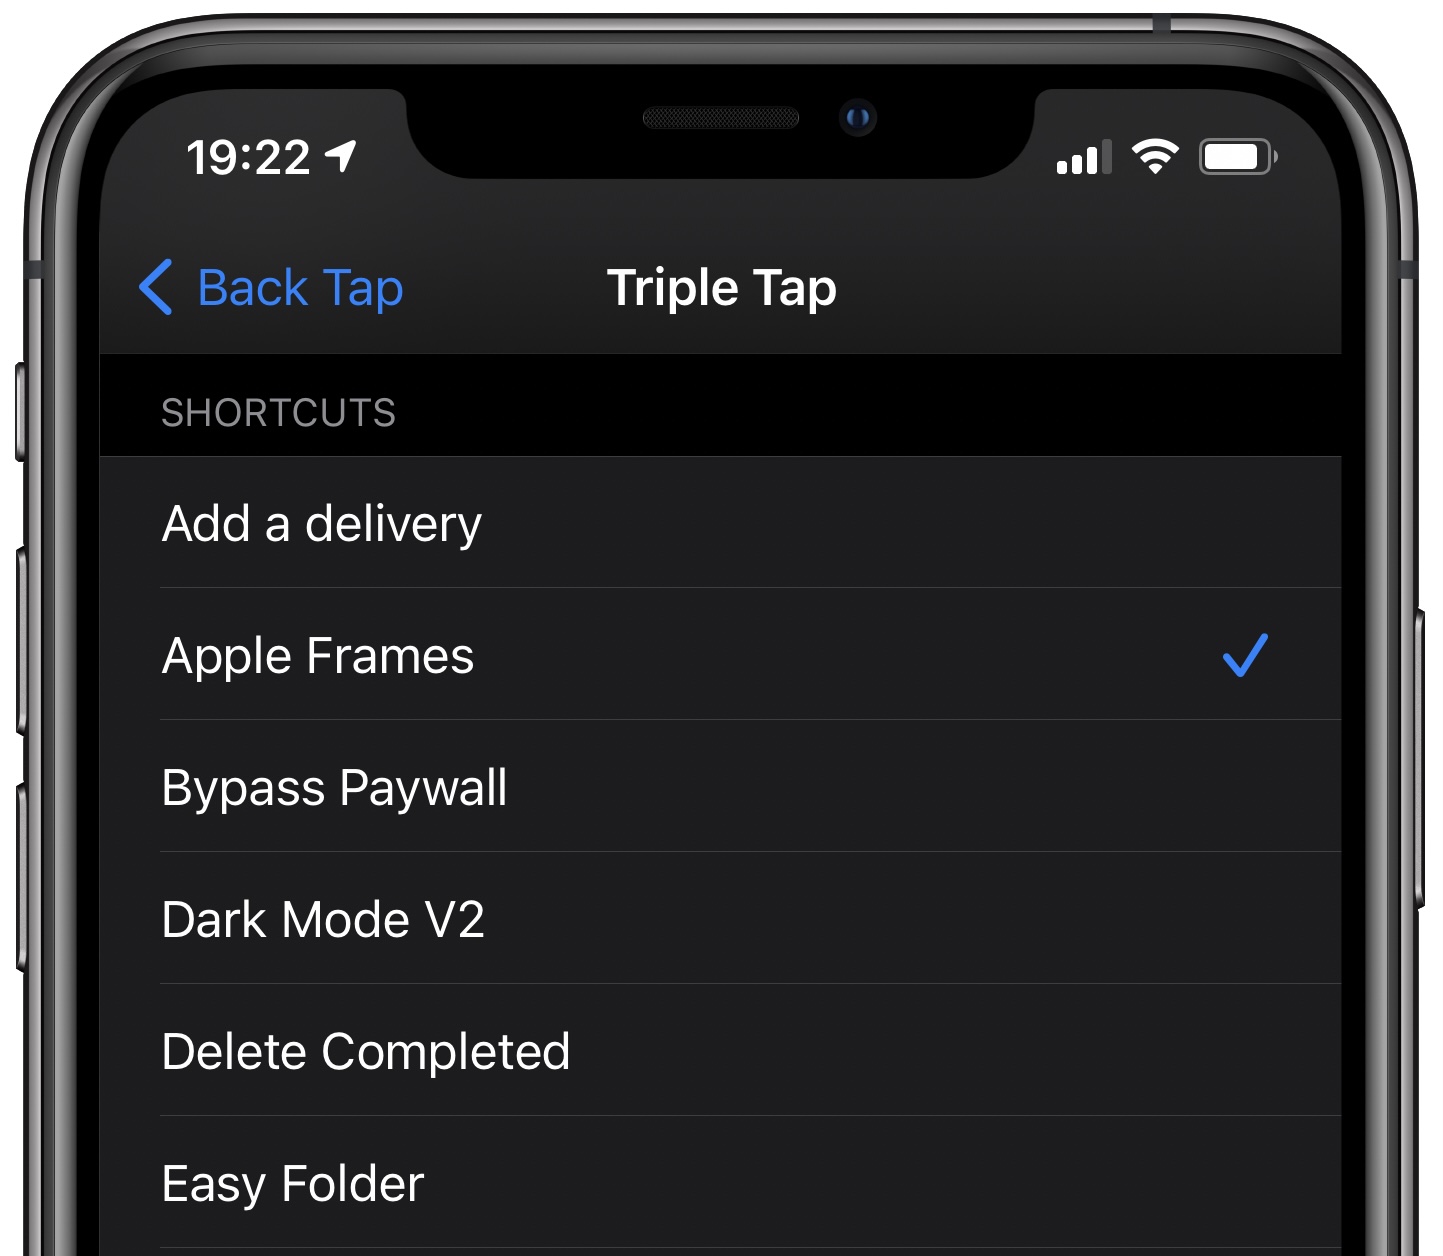 Custom iPhone actions Back Tap - running custom workflows from the Shortcuts app